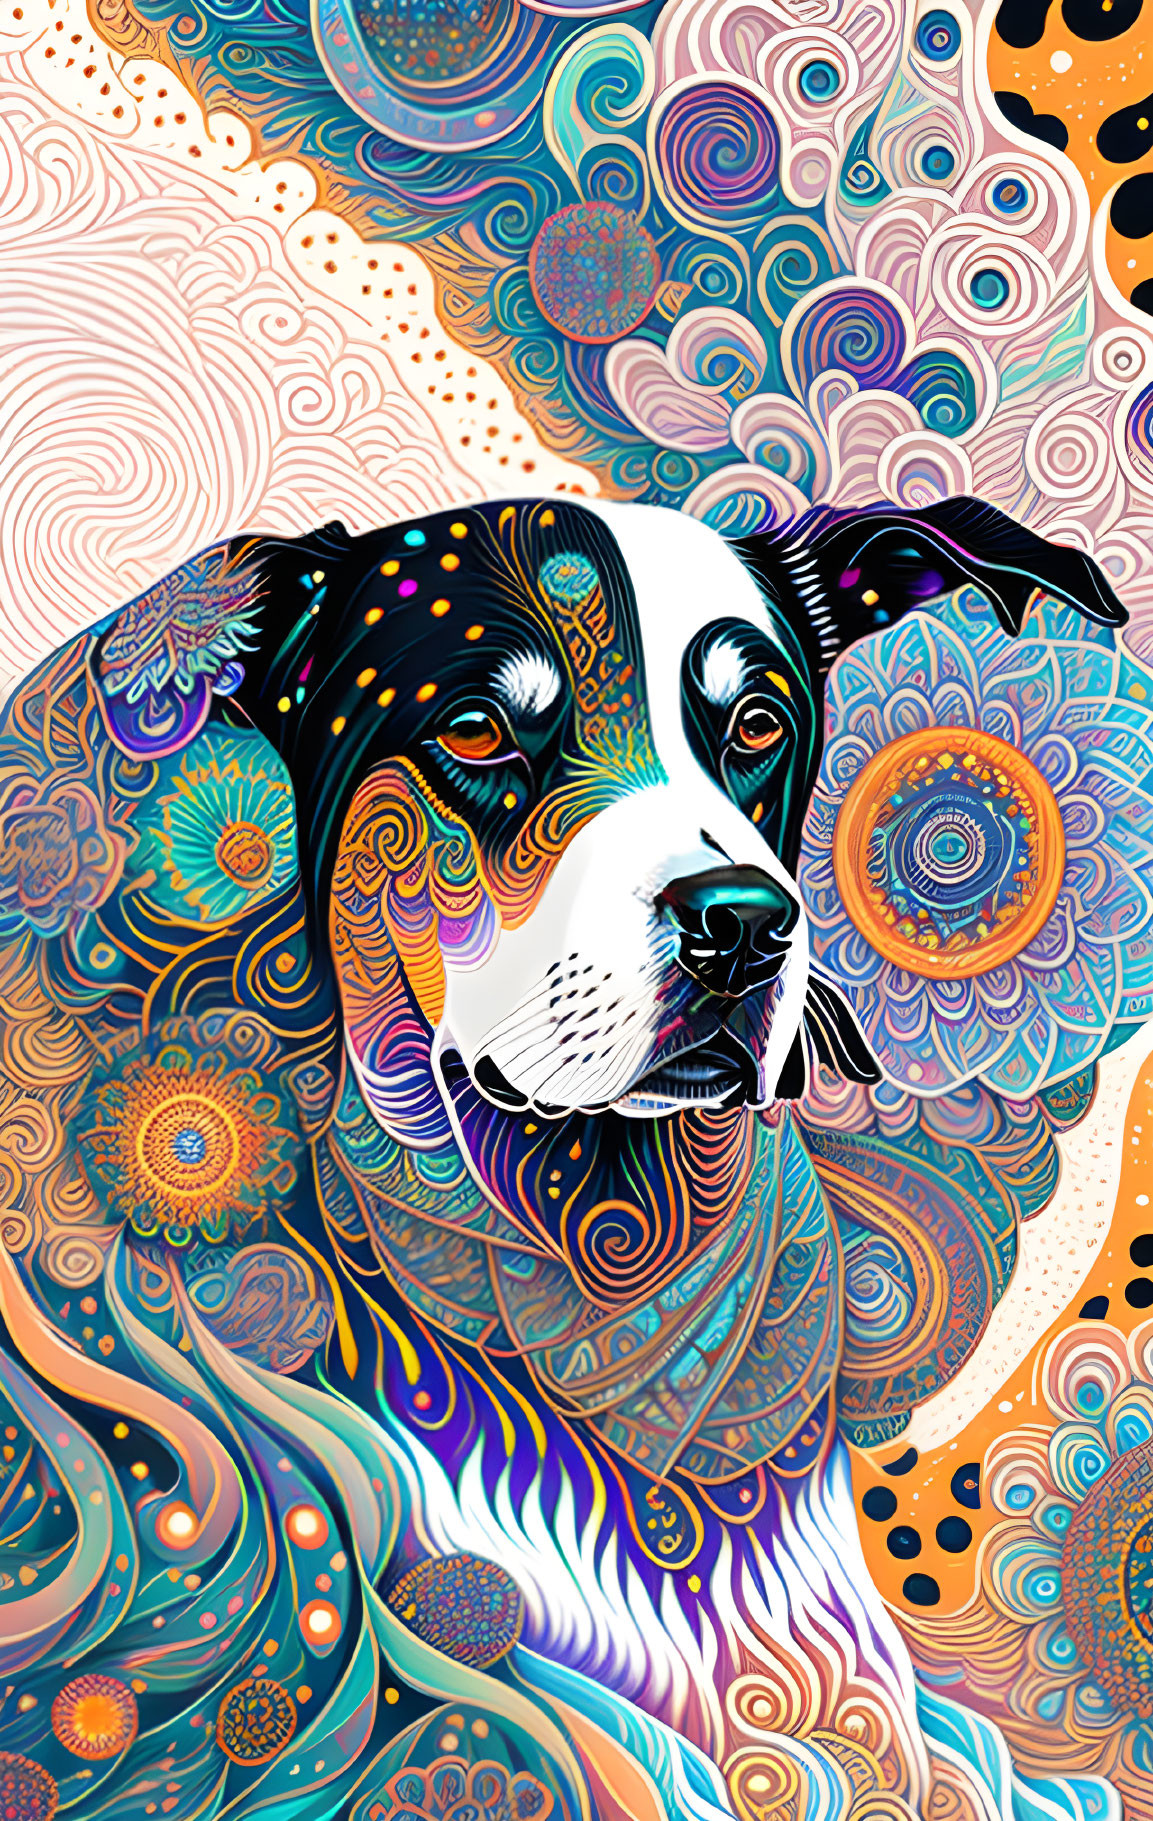 Colorful Psychedelic Dog Illustration with Swirl Patterns